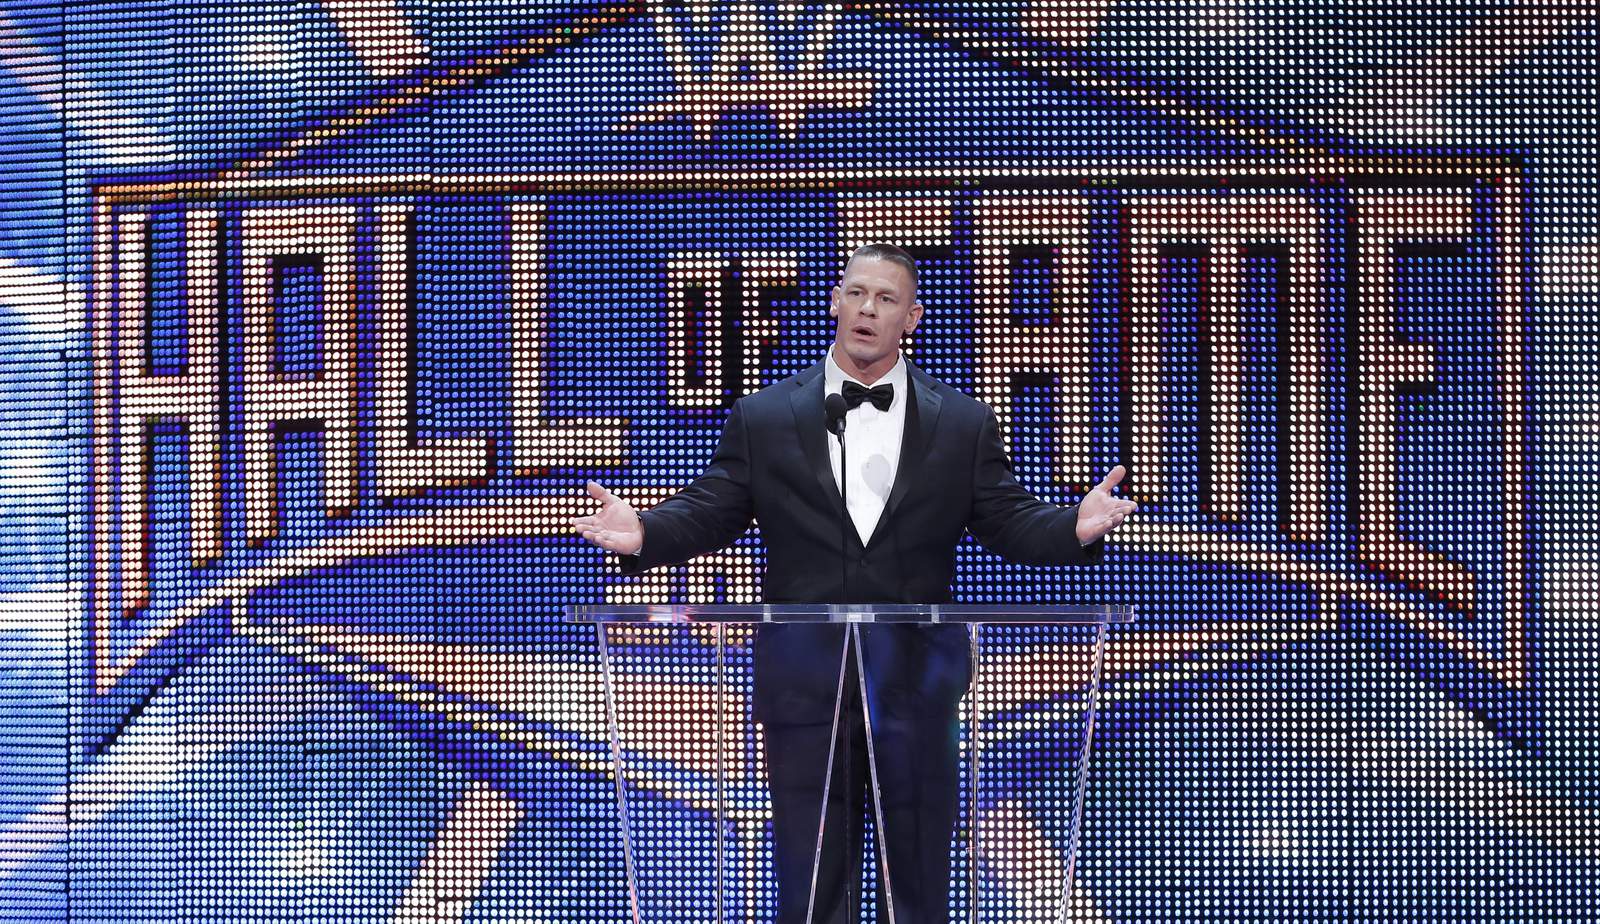 Is a WWE Hall of Fame coming to Central Florida?